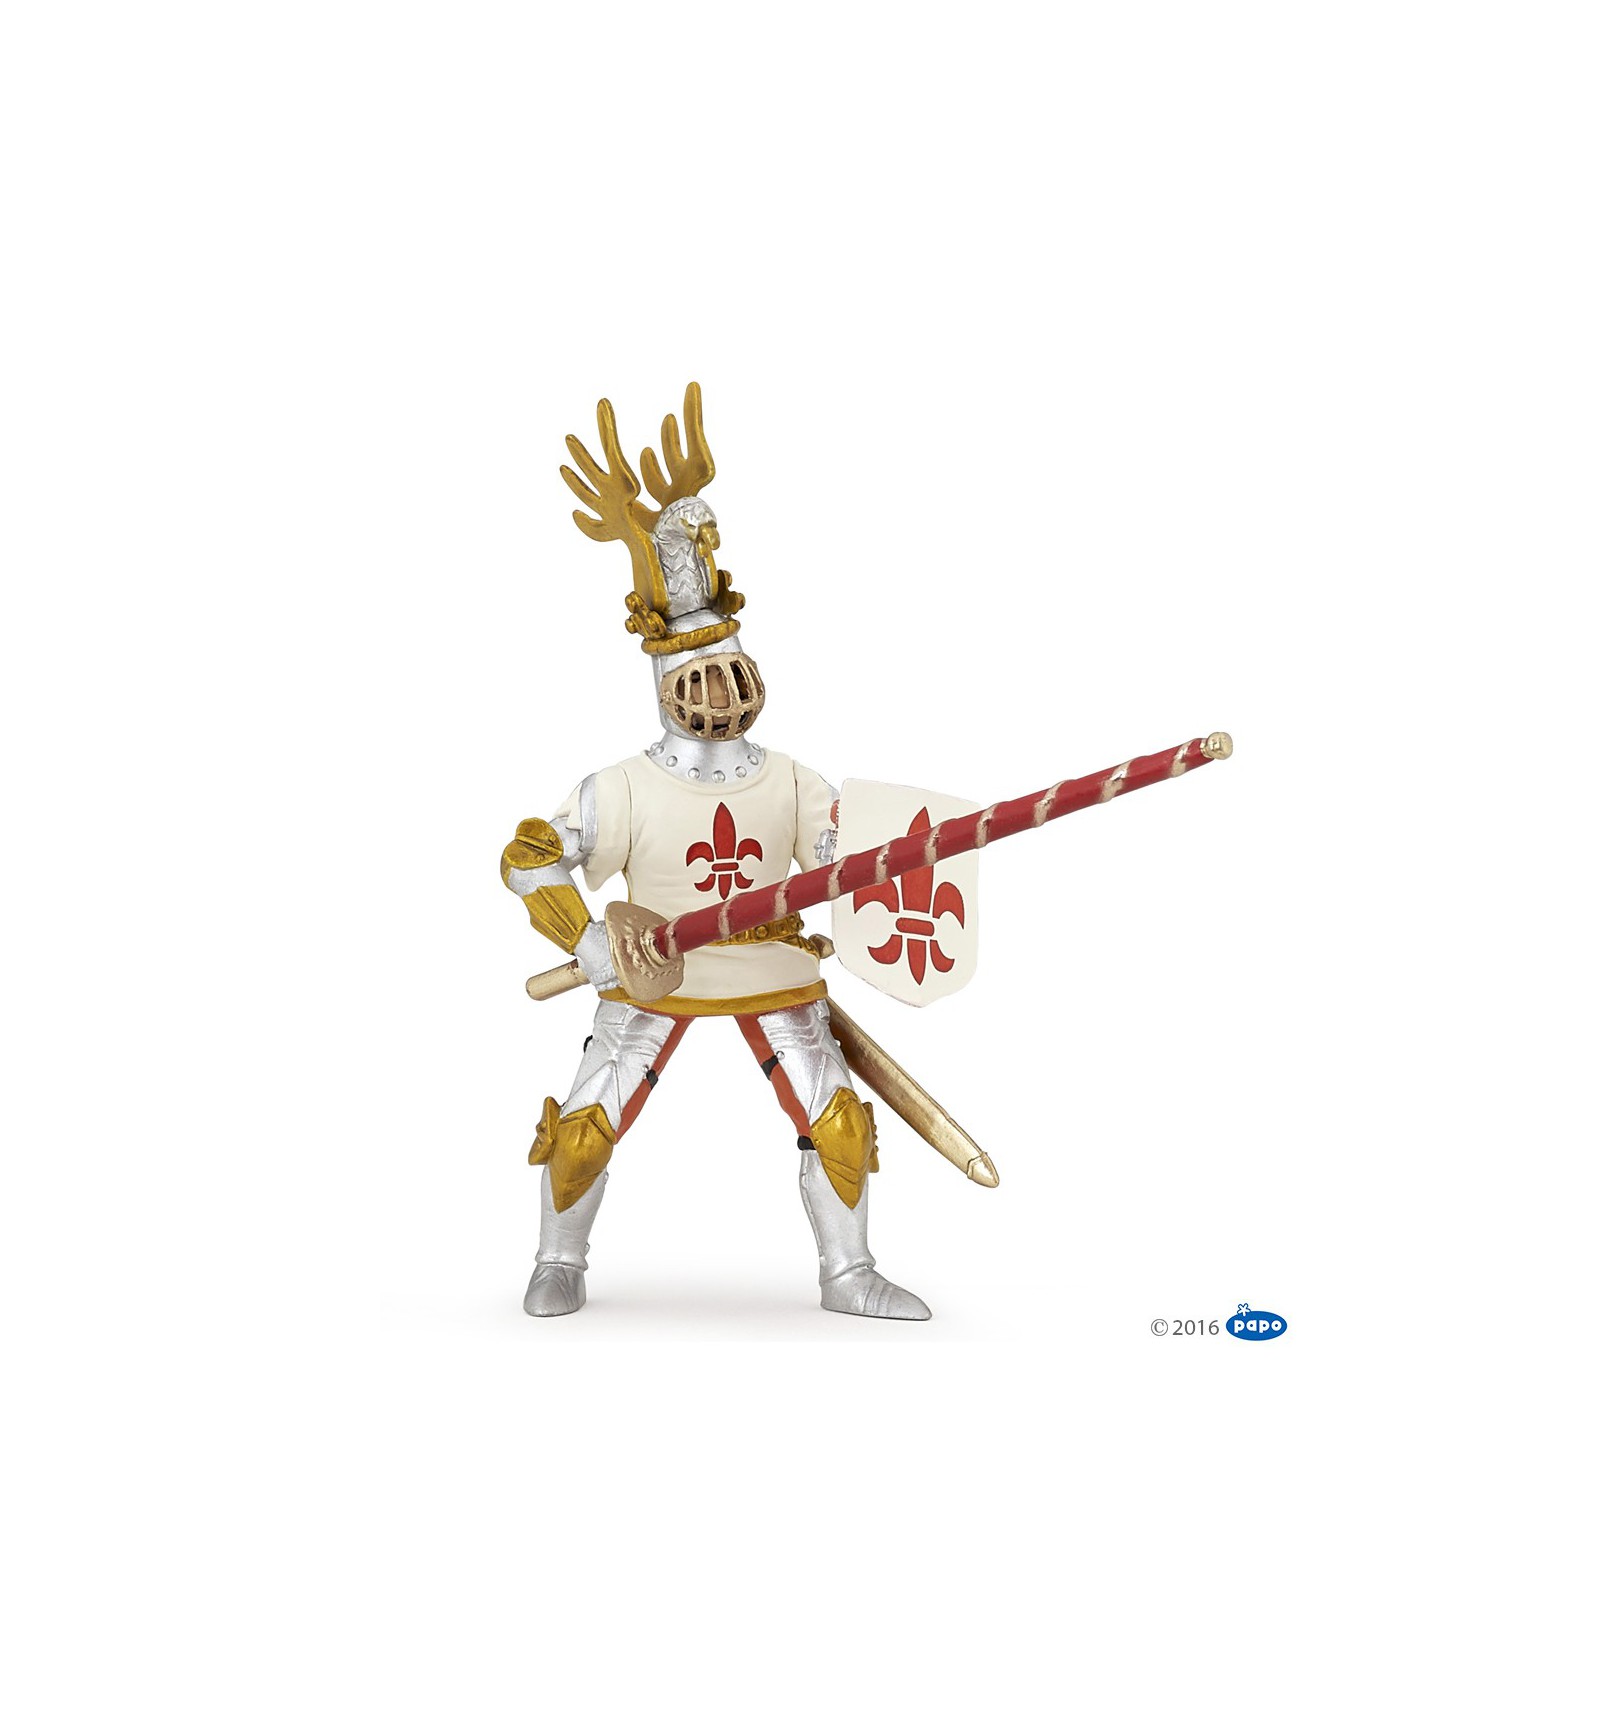 PAPO Fantasy World White Crested Knight Toy Figure 